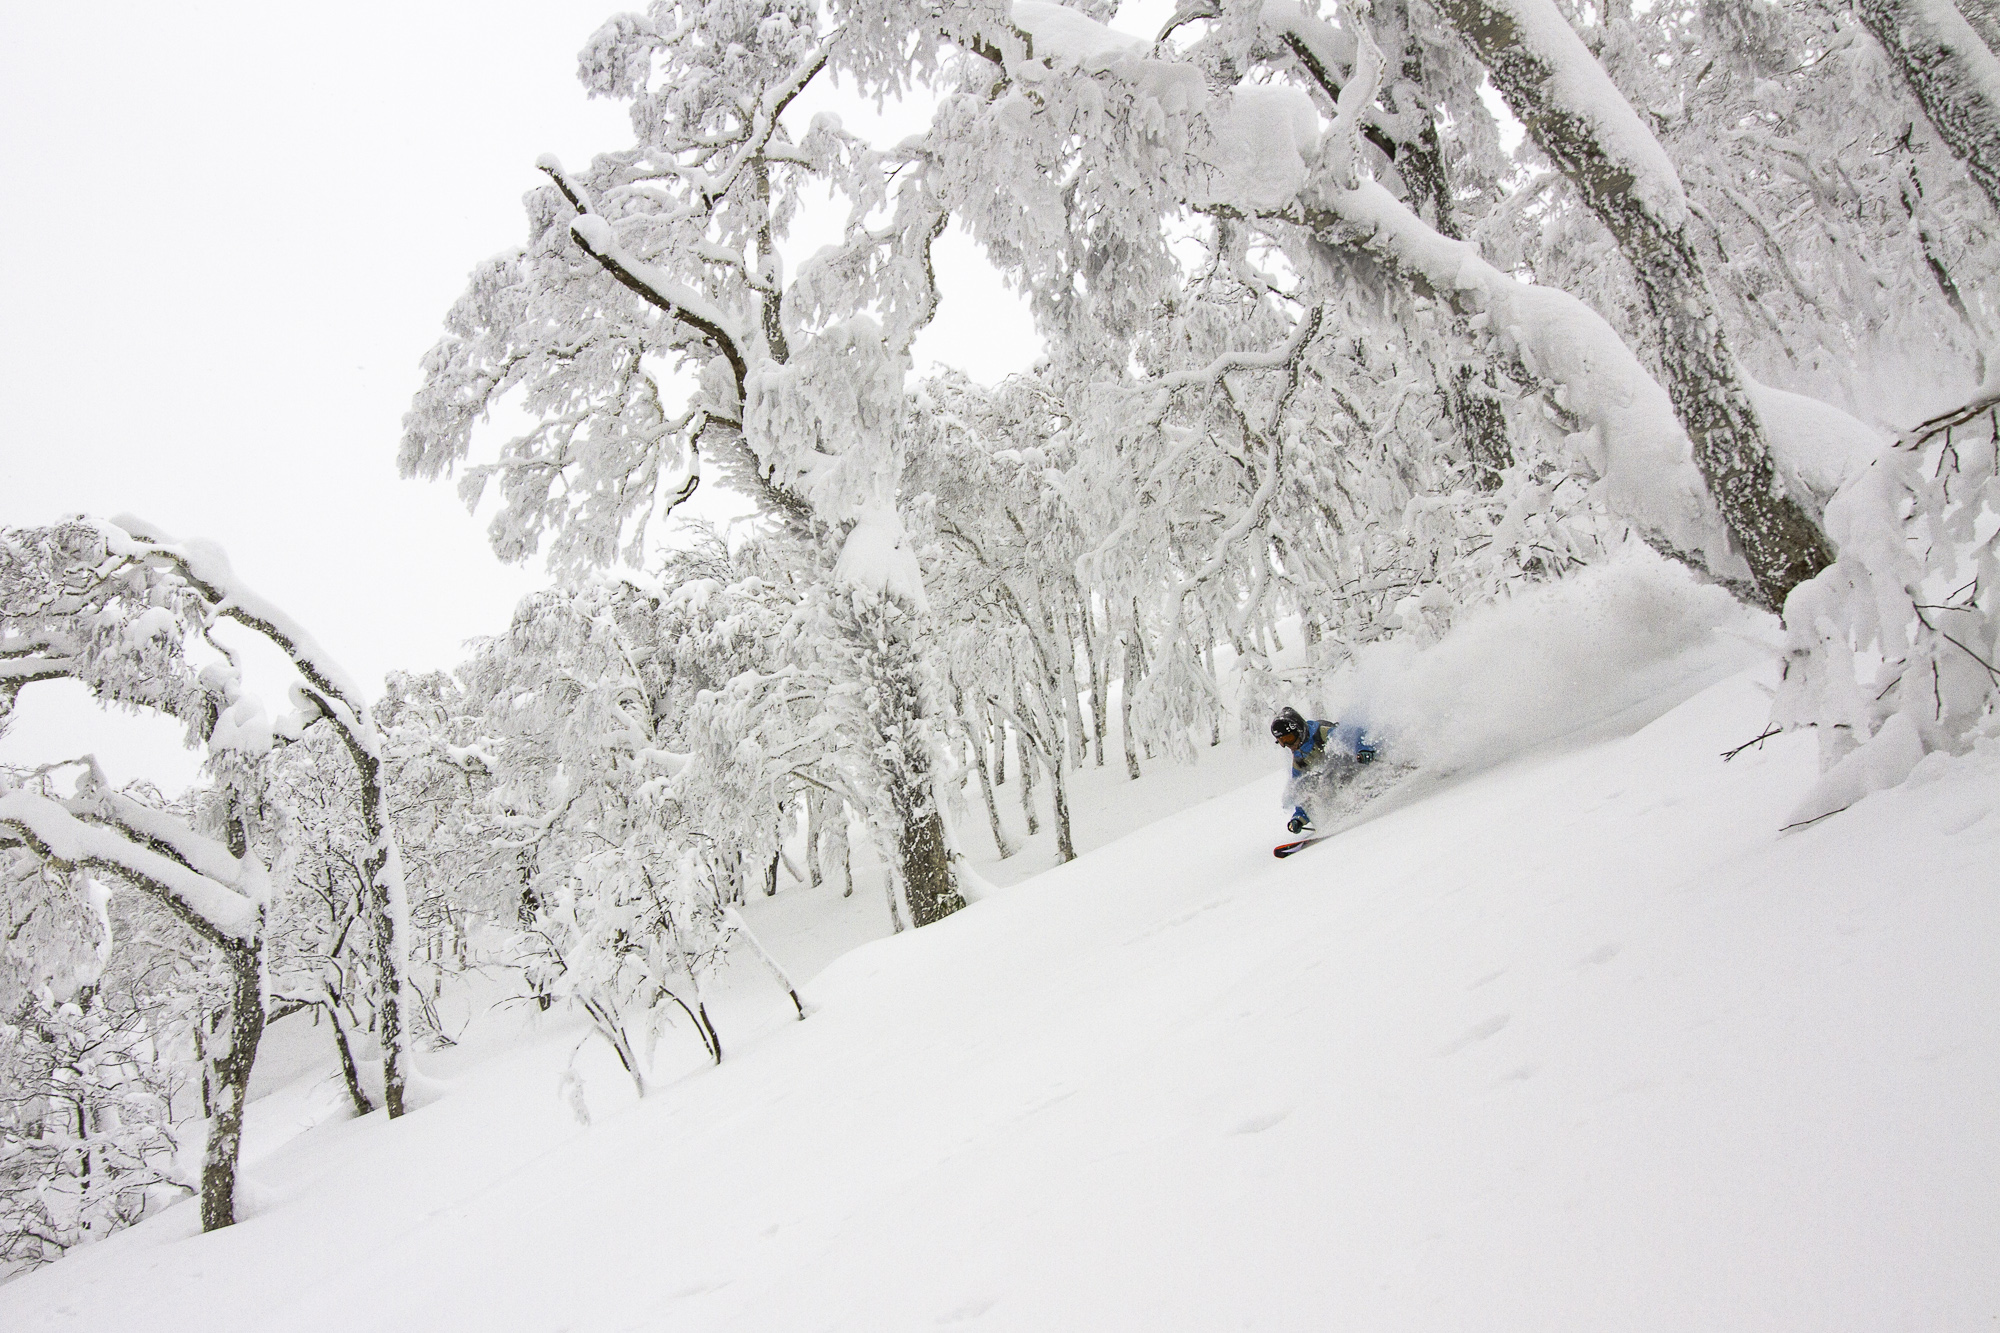 Mitchell Brower skis backcountry powder in Japan.